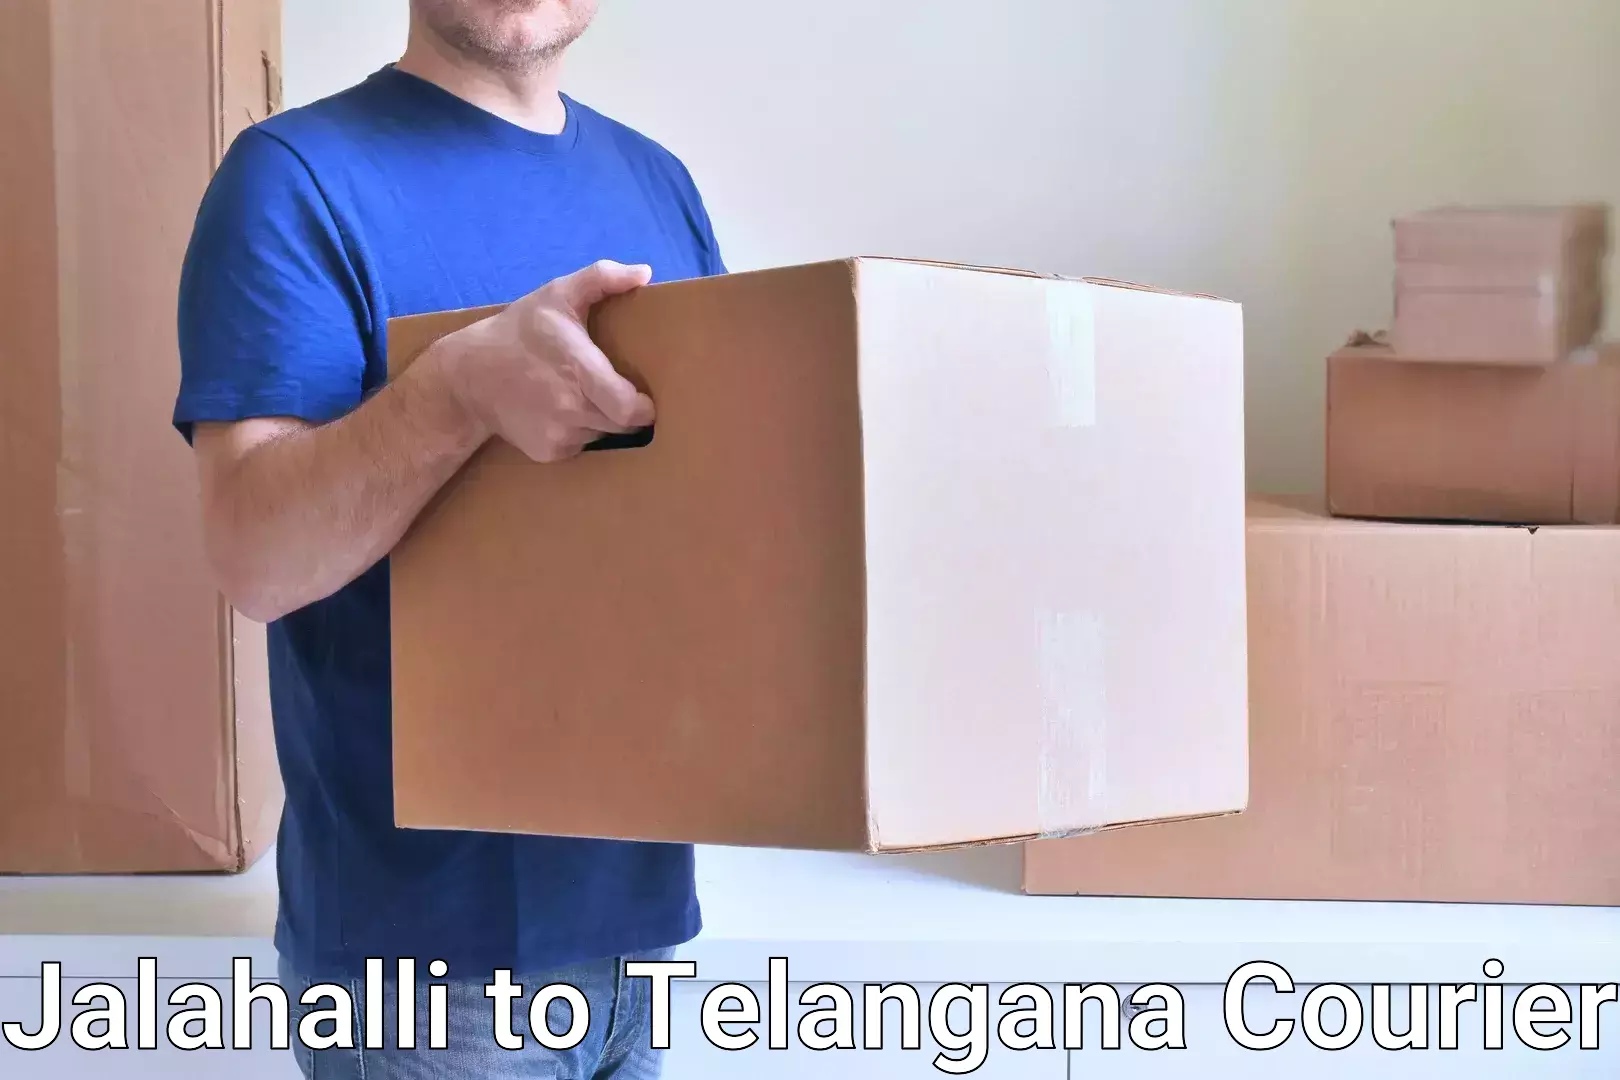 Courier service booking Jalahalli to Achampet